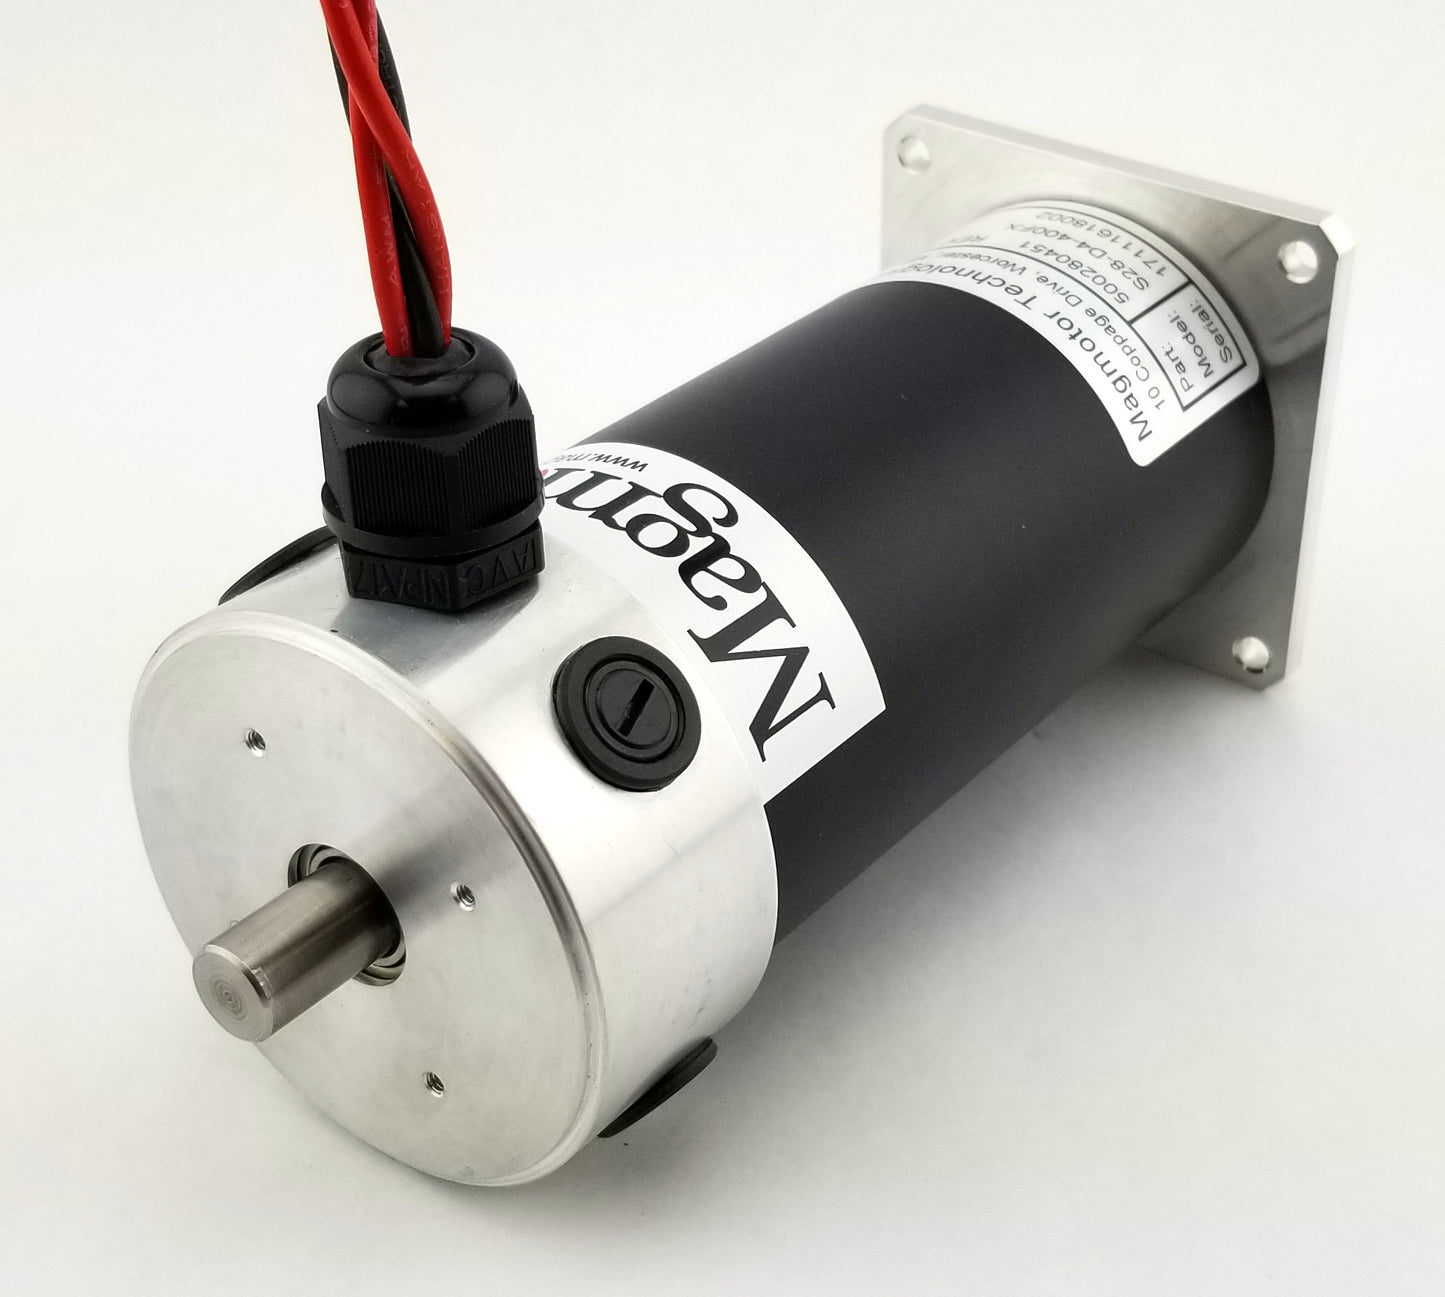 Magmotor S28-D4-400FX 12 to 30 Volt 4 Pole Brushed Motor 500280451 Rear View